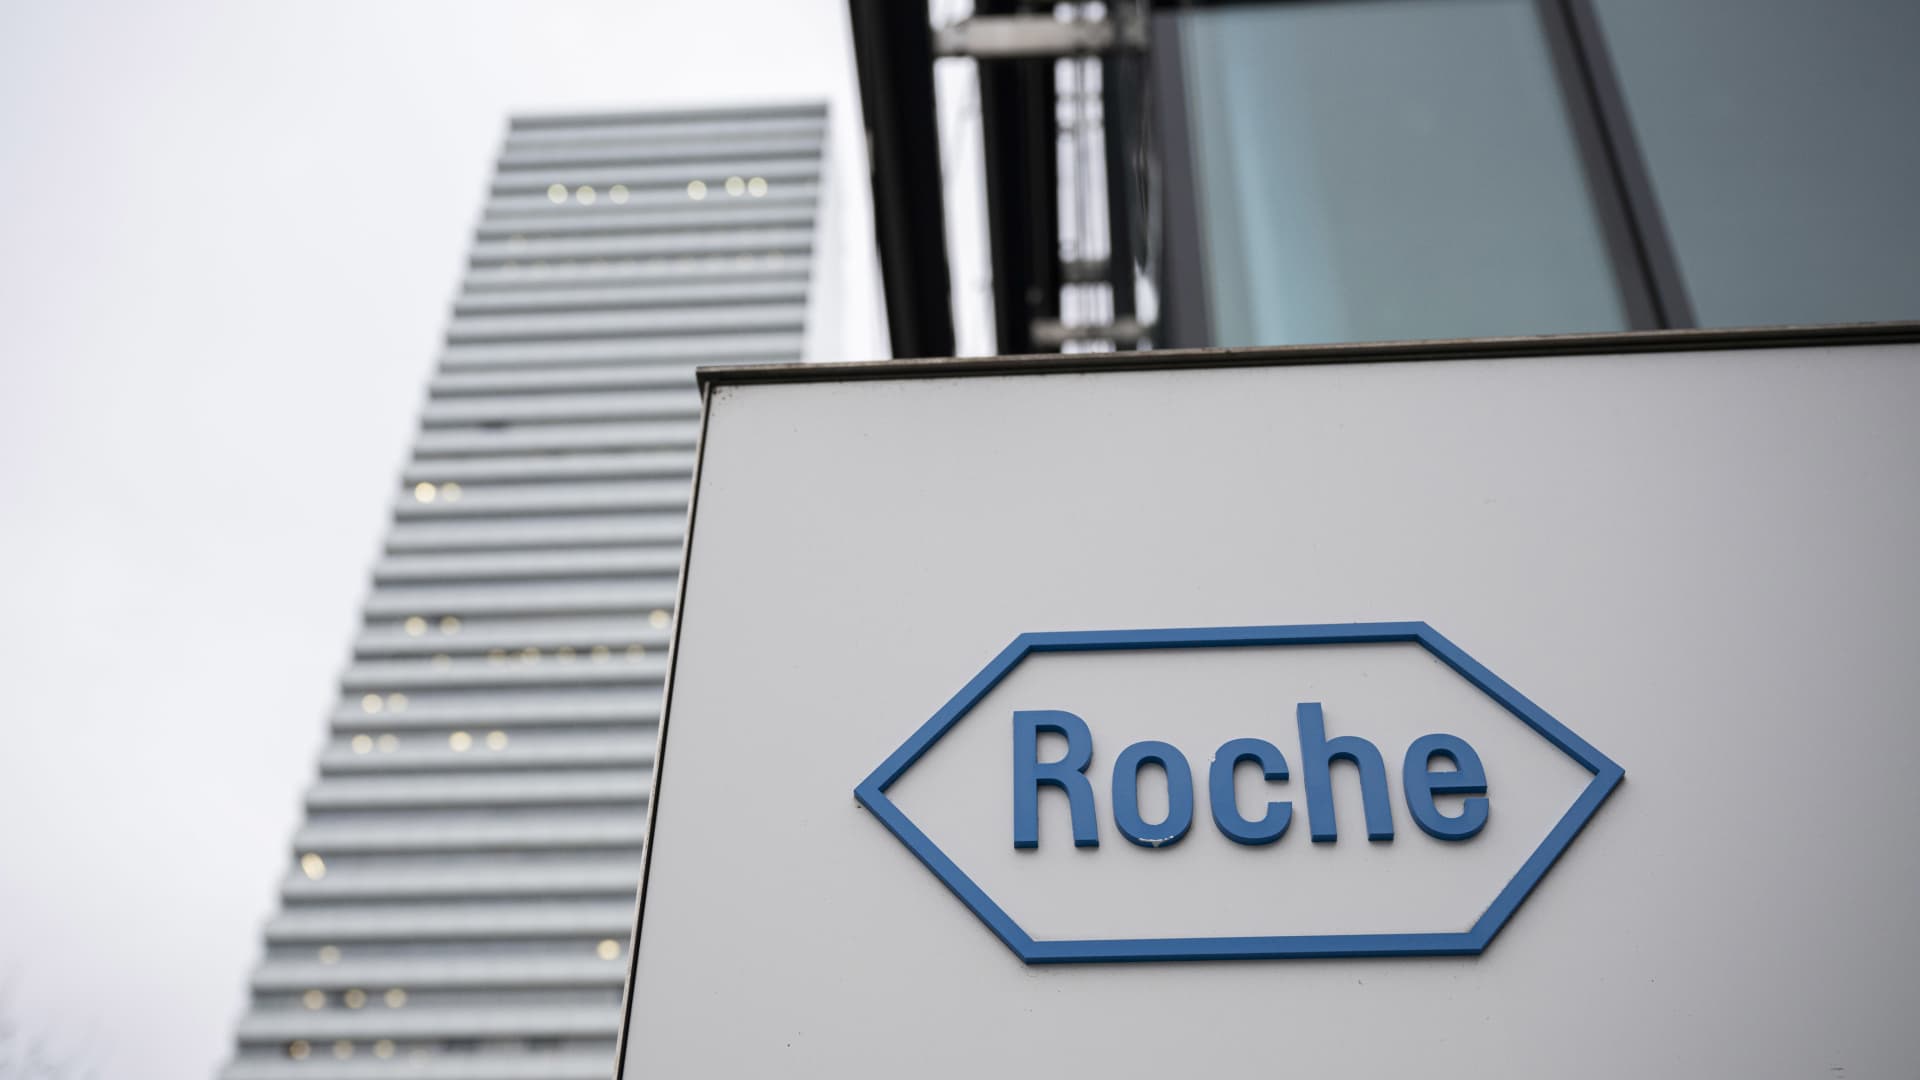 Roche weight loss drug shows promising results in early study